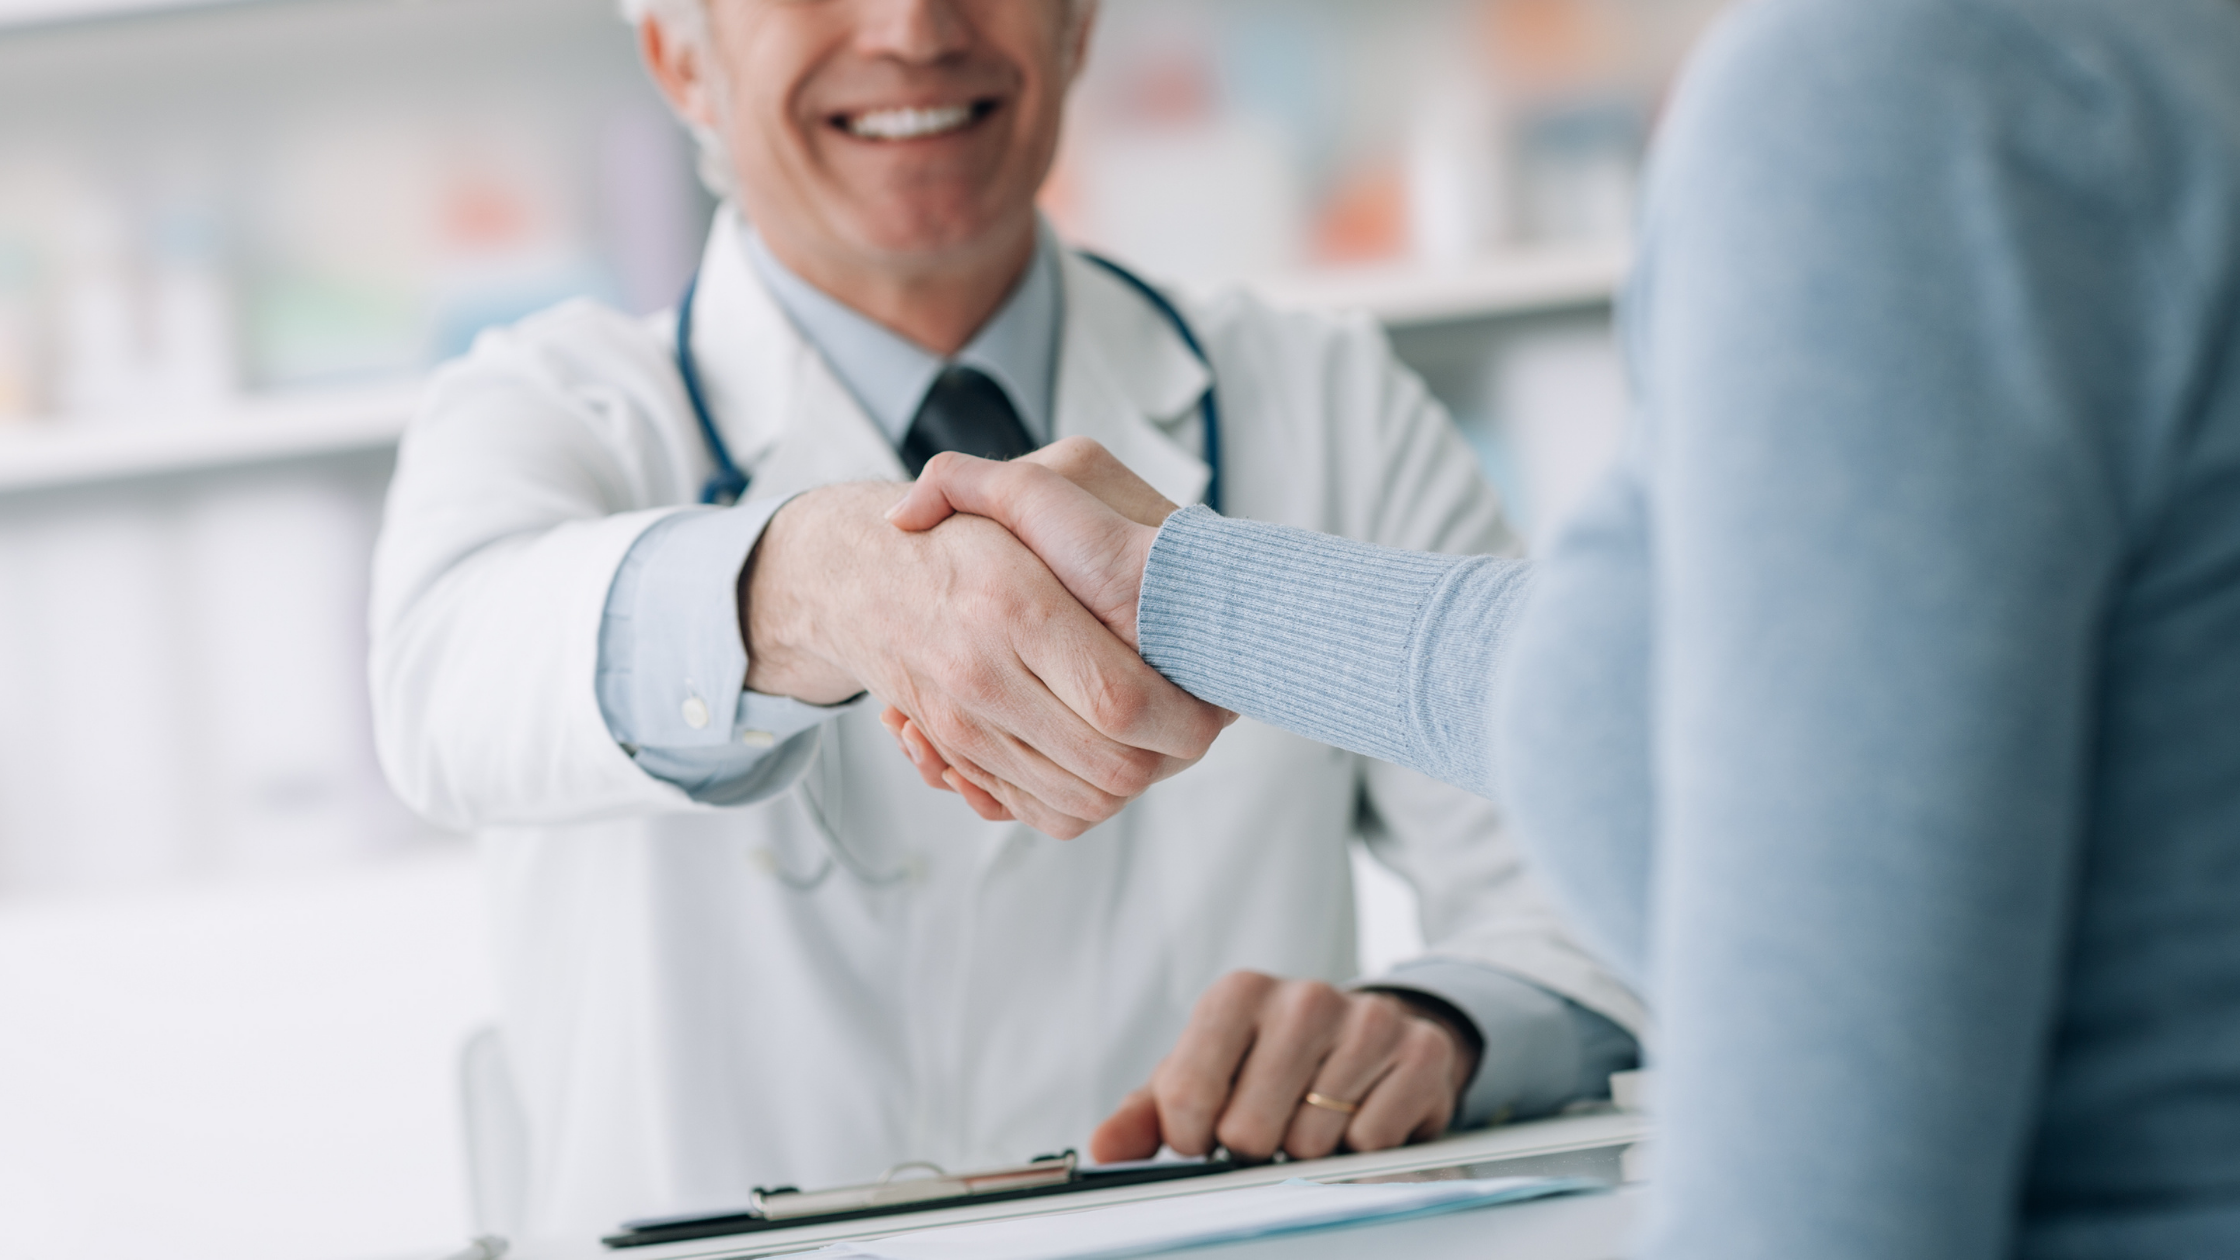 Positive doctor and patient relationship